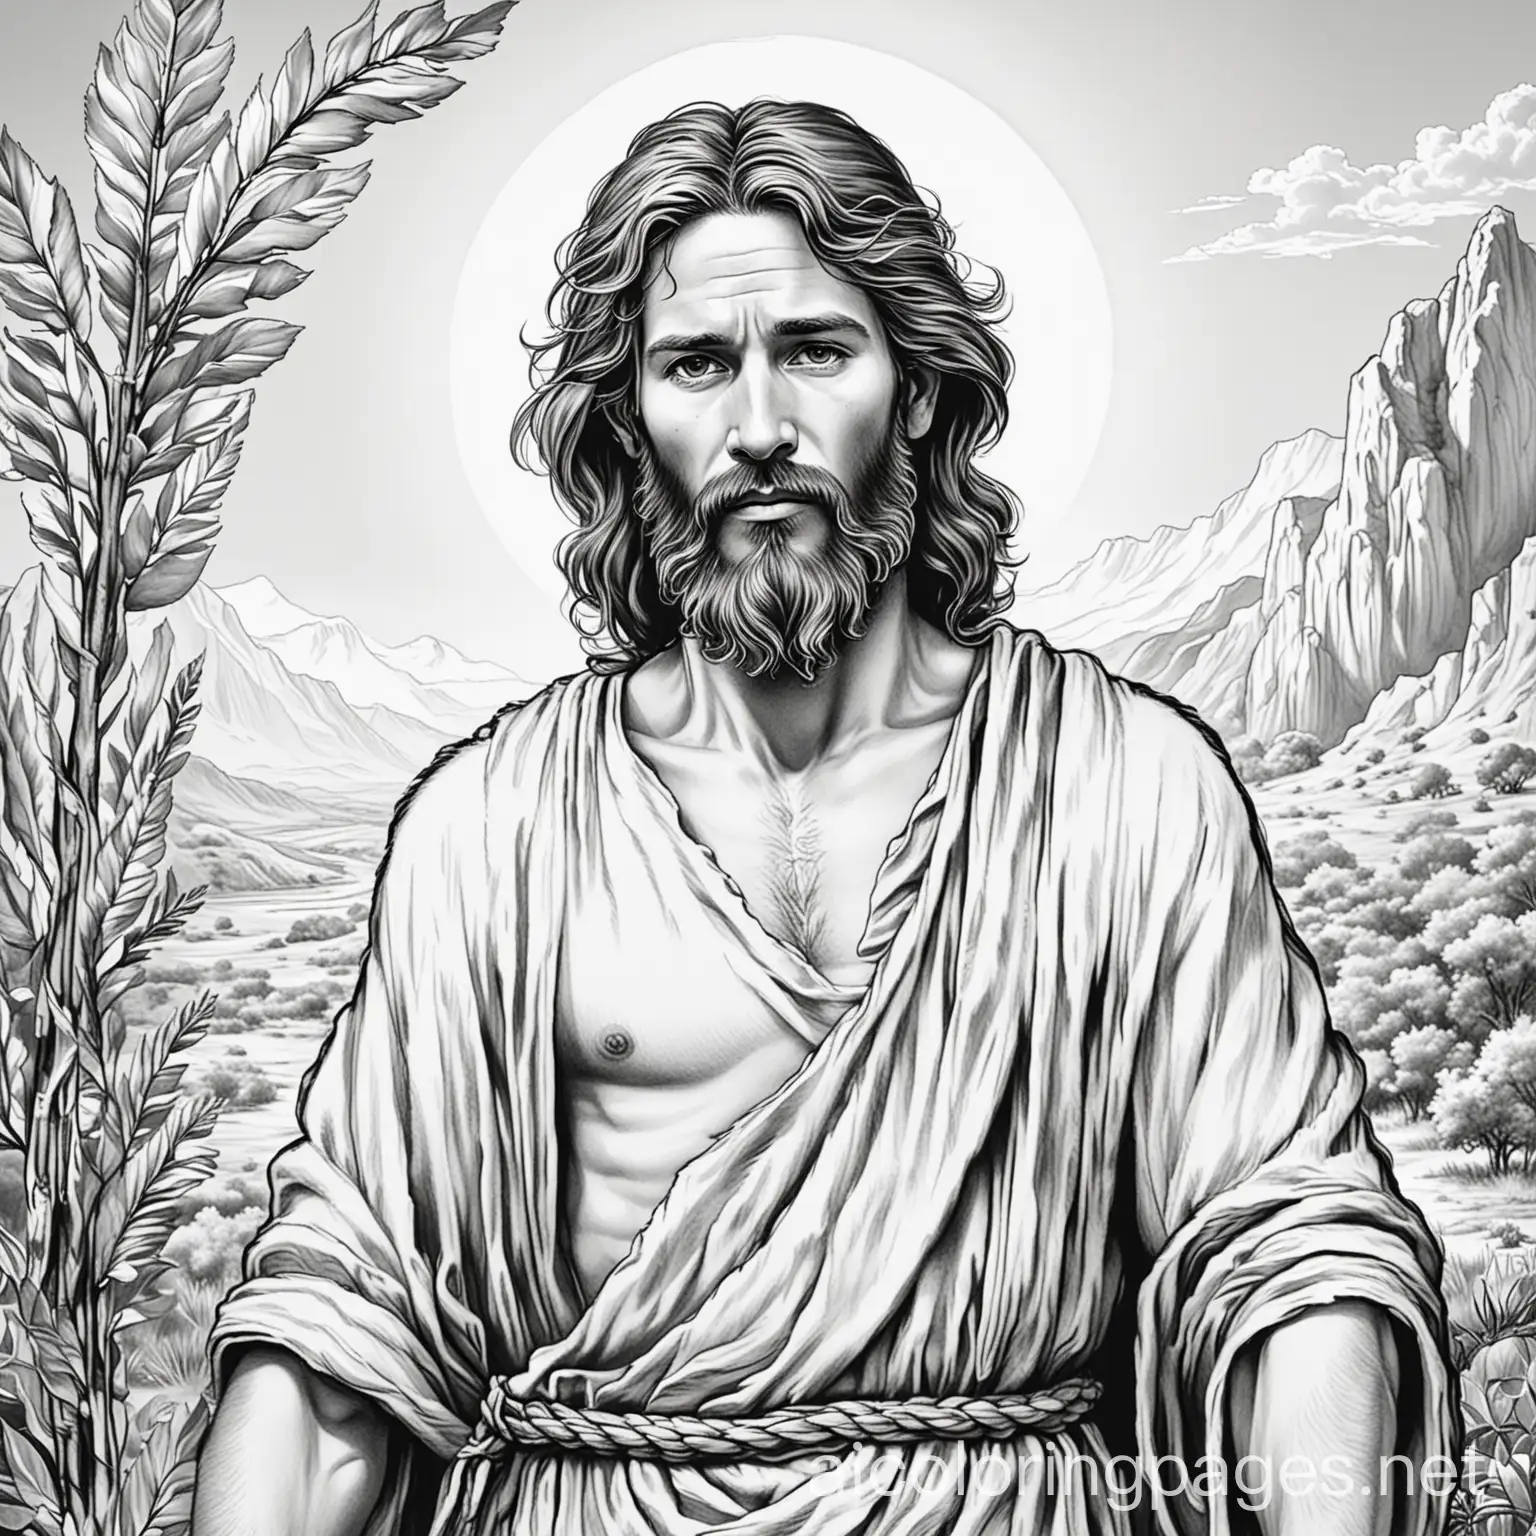 John the baptist of the bible black and white no background, Coloring Page, black and white, line art, white background, Simplicity, Ample White Space. The background of the coloring page is plain white to make it easy for young children to color within the lines. The outlines of all the subjects are easy to distinguish, making it simple for kids to color without too much difficulty